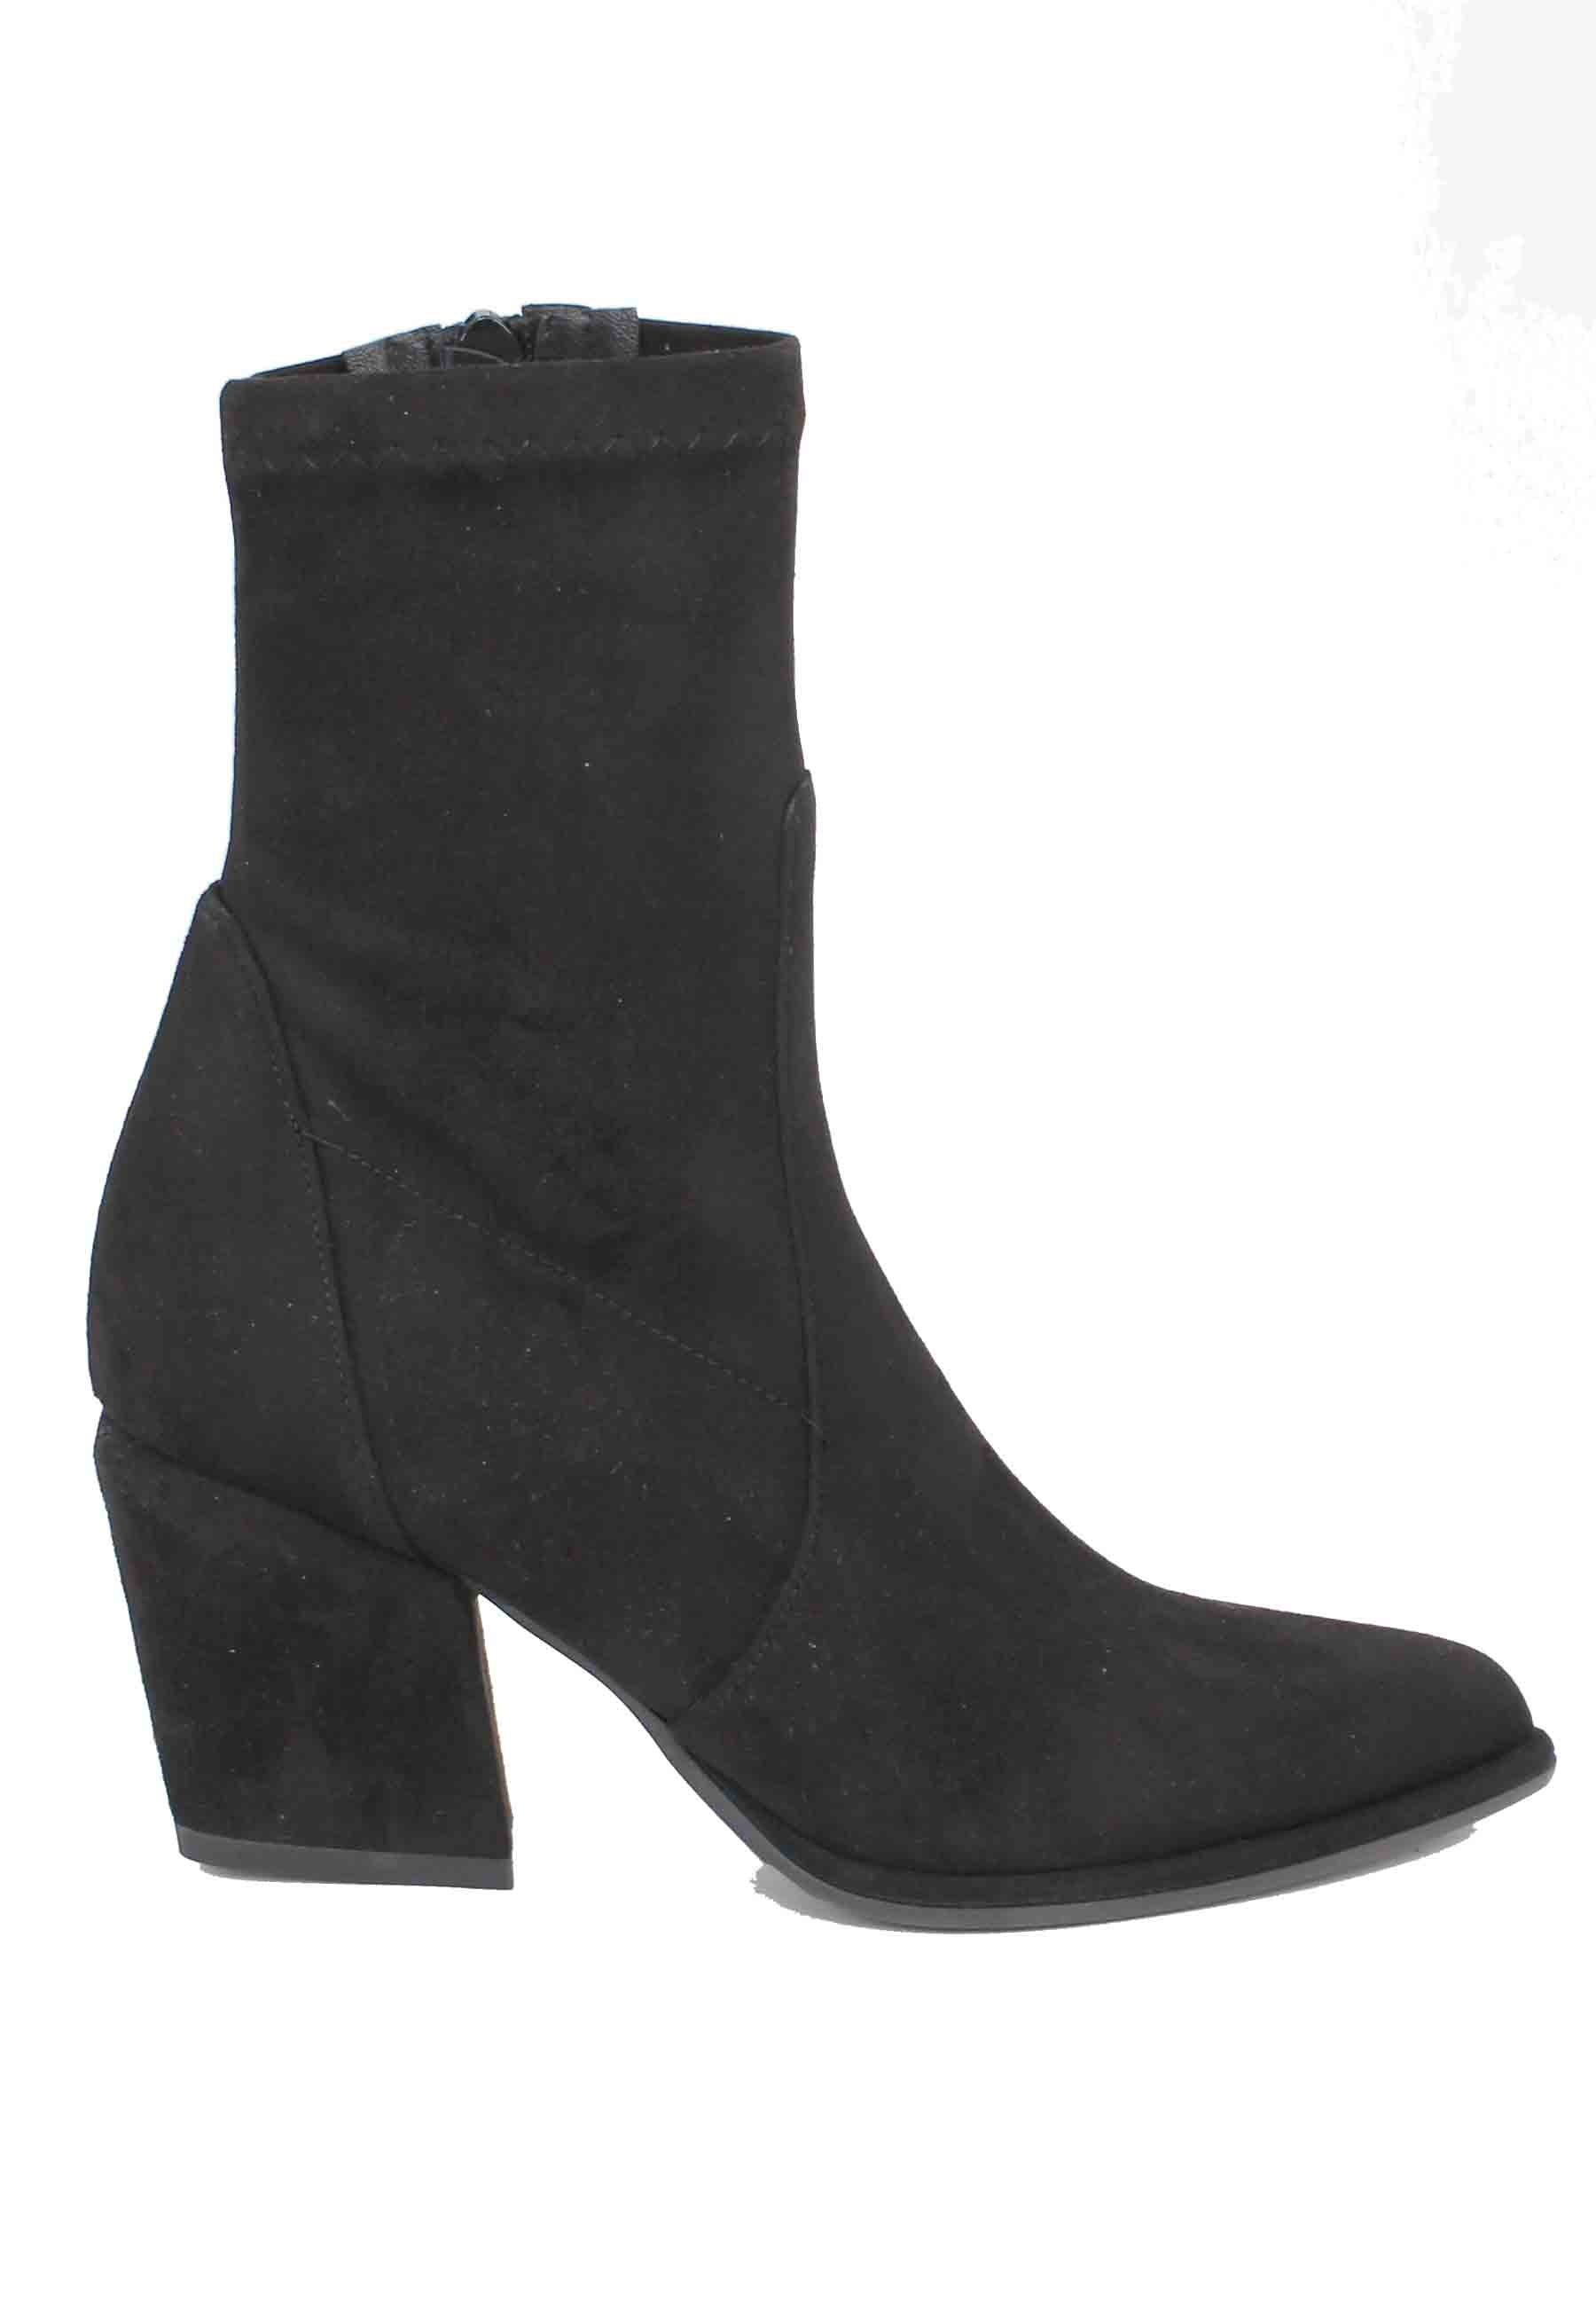 Women's high heel black eco suede ankle boots